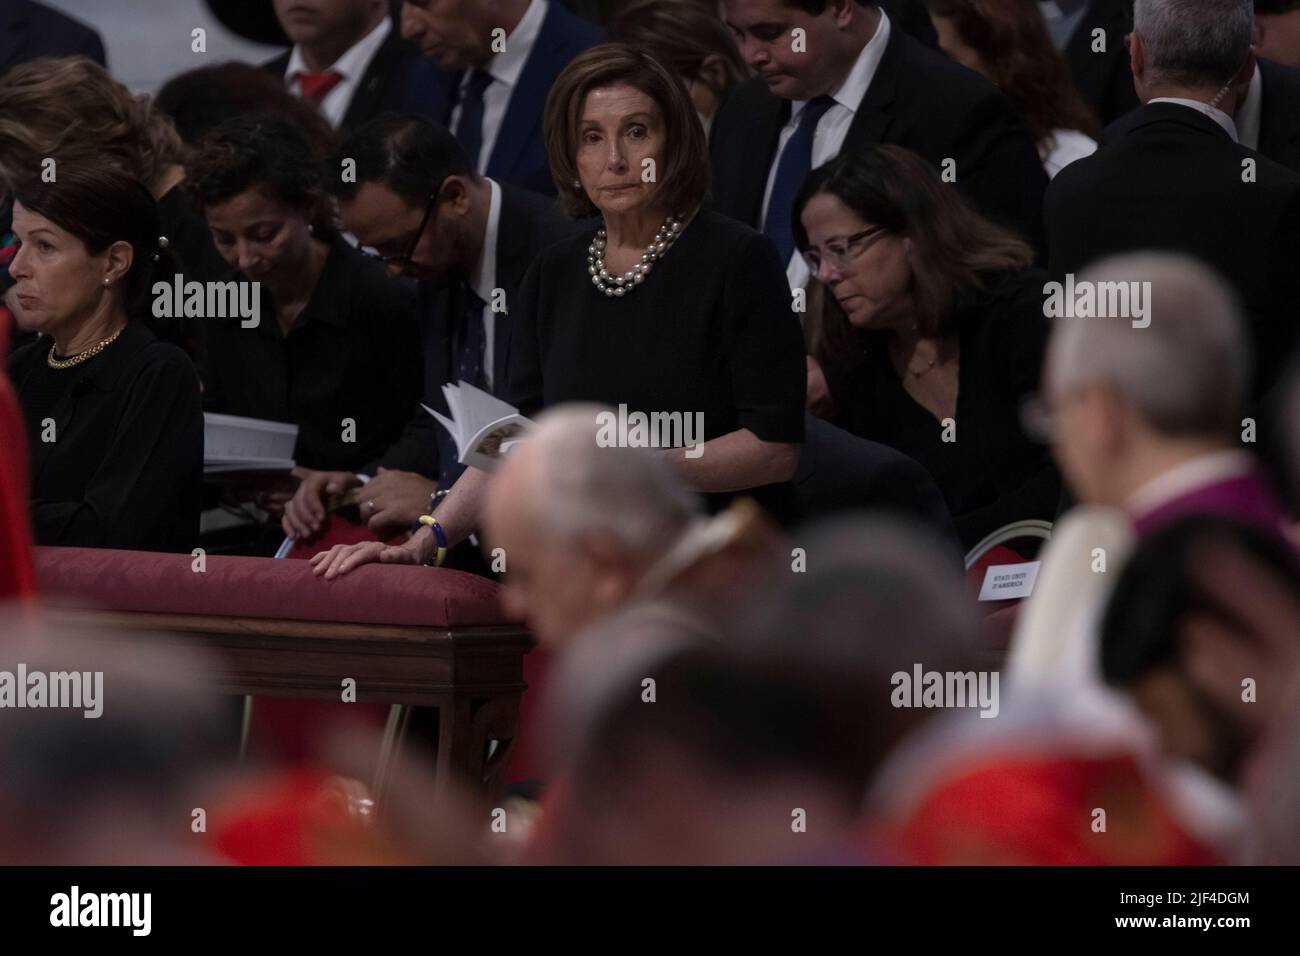 Vatican City, Vatican,. 29 June 2022. Speaker of the House Nancy Pelosi looks at Pope Francis as he celebrates a Mass on the Solemnity of Saints Peter and Paul, in St. Peter's Basilica. Credit: Maria Grazia Picciarella/Alamy Live News Stock Photo